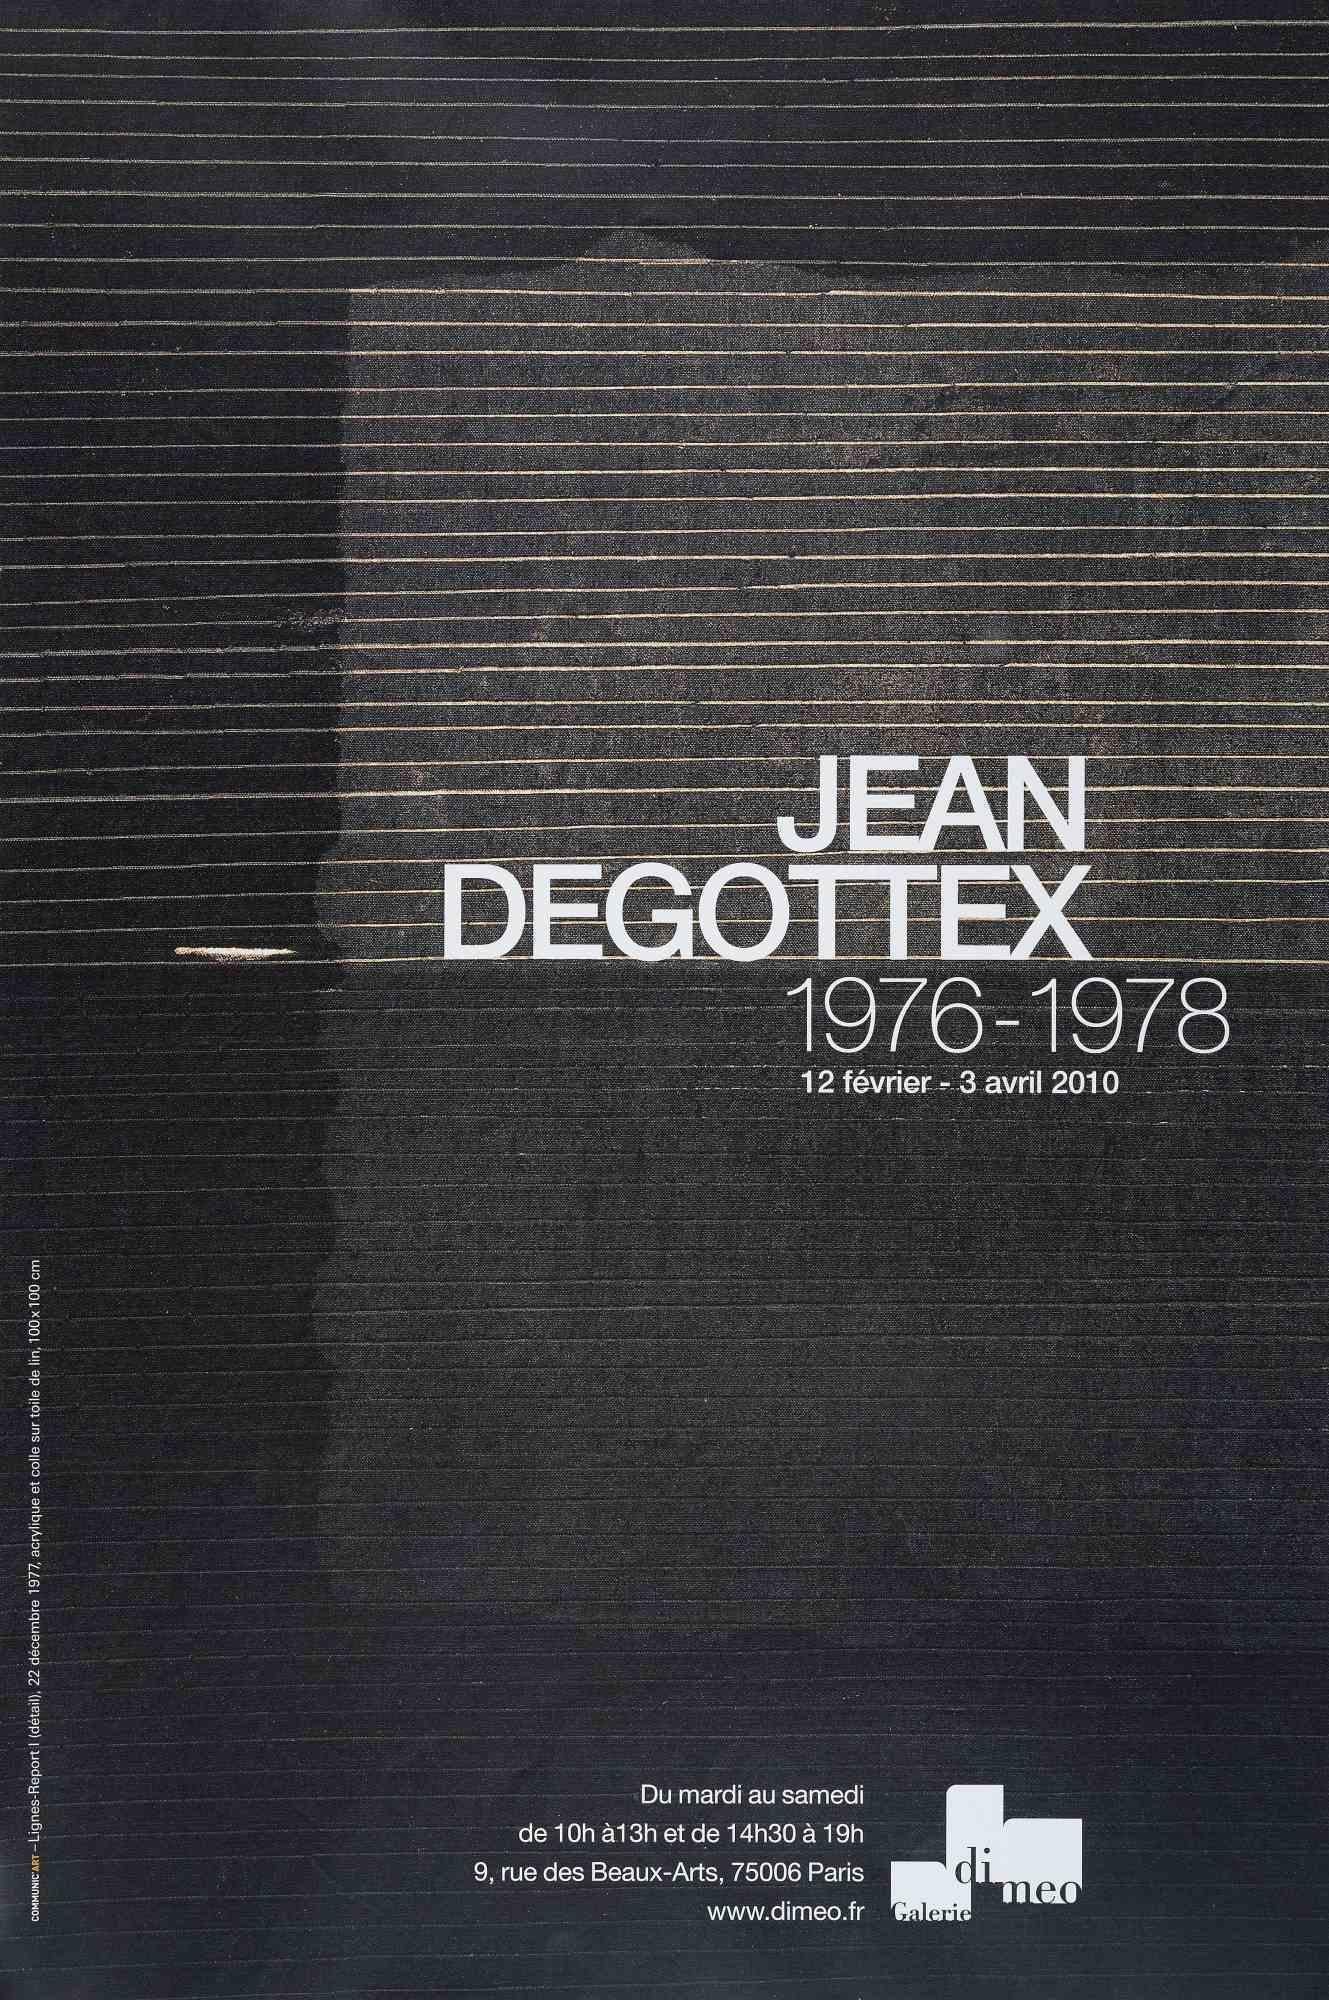 Jean Degottex, Vintage Poster Exhibition is an offset print realized in the occasion of the exhibition held in Meo Gallery in 2010.

Good conditions.